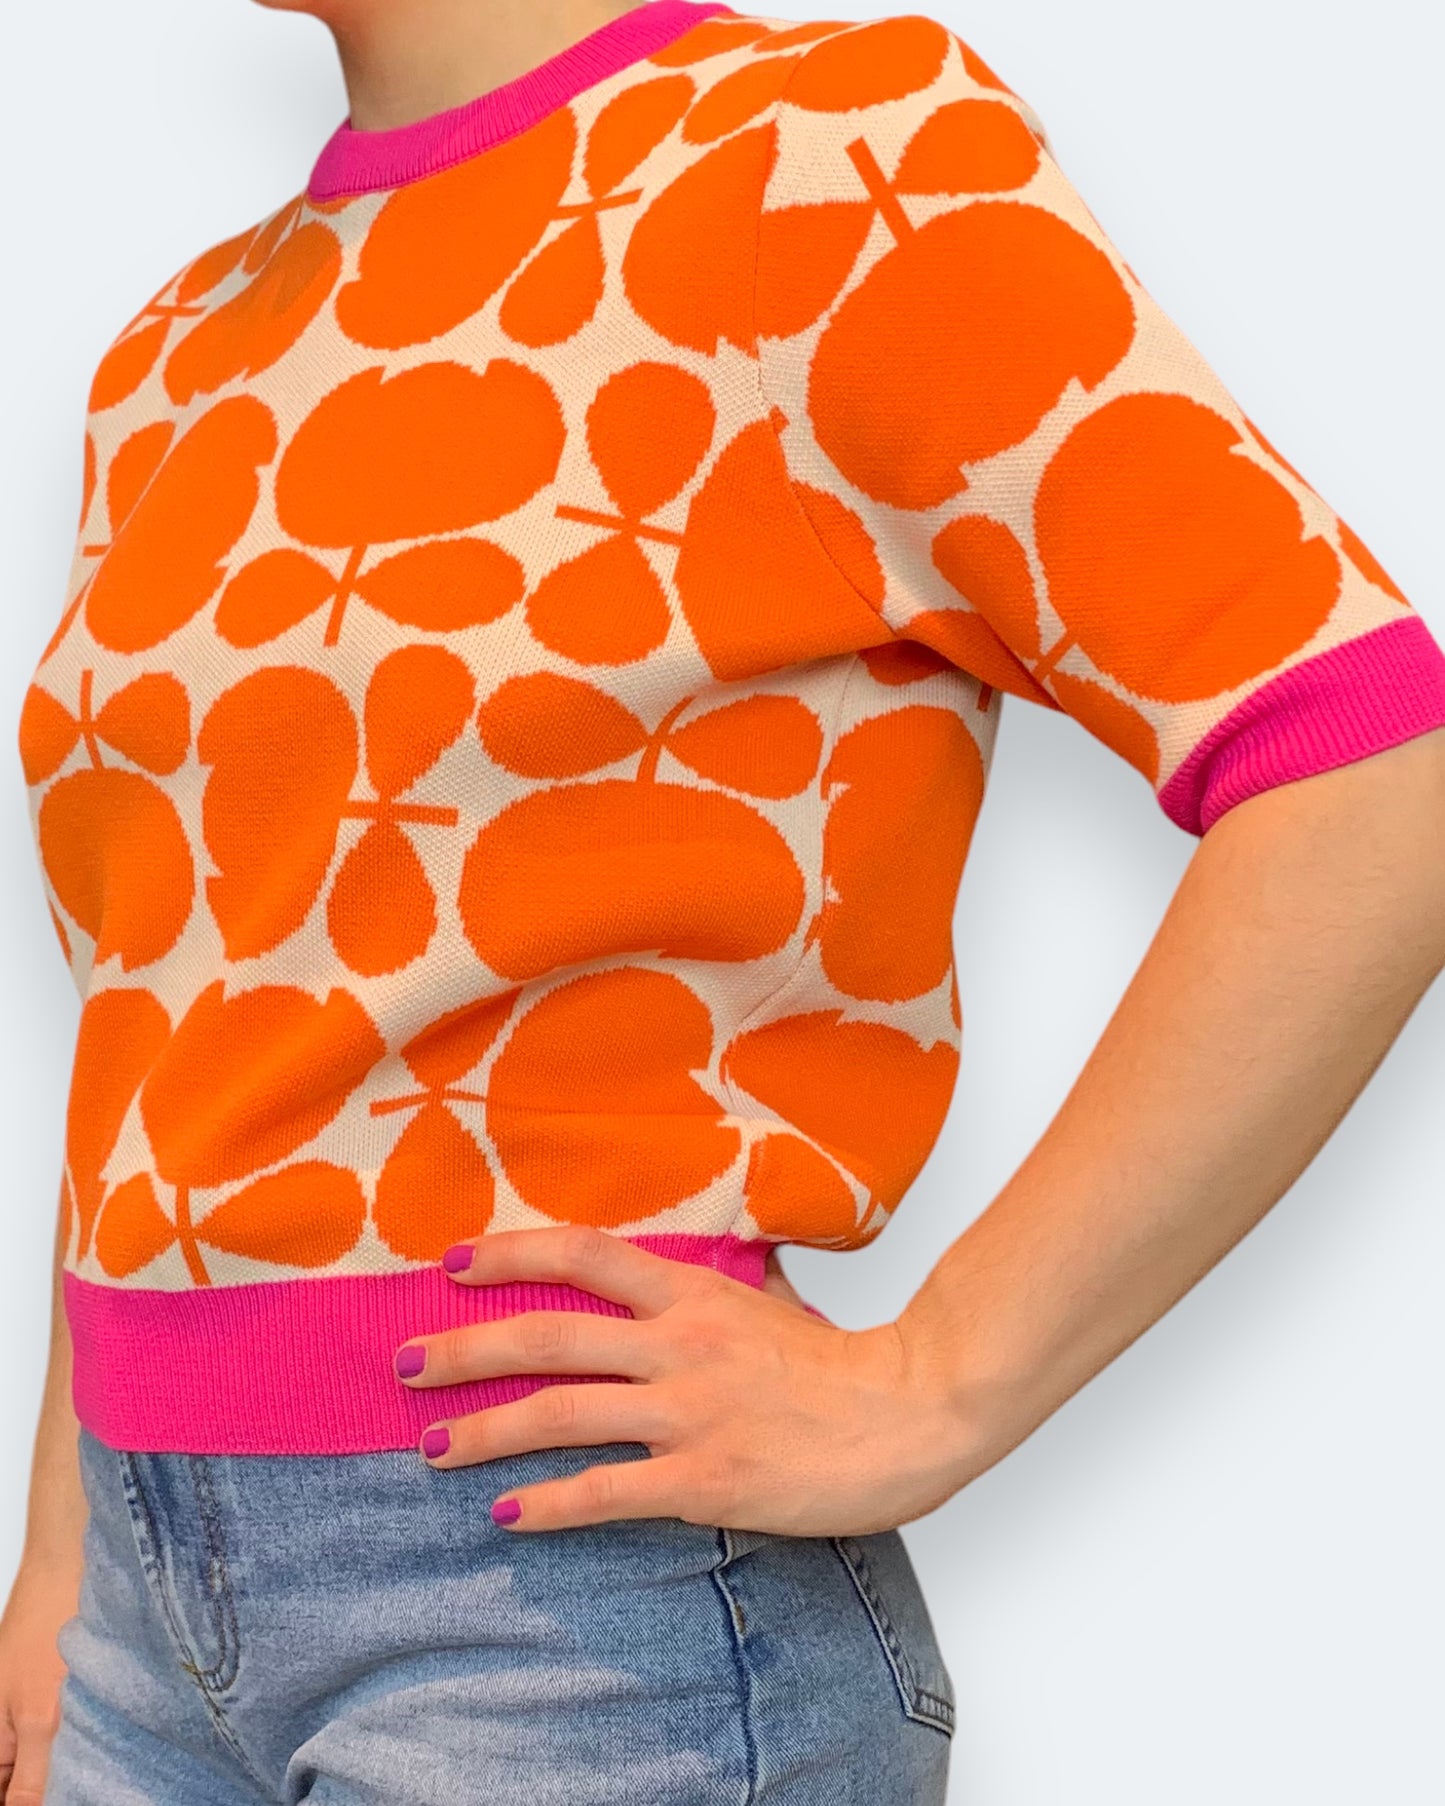 Compania Fantastica orange and pink patterned knit t-shirt